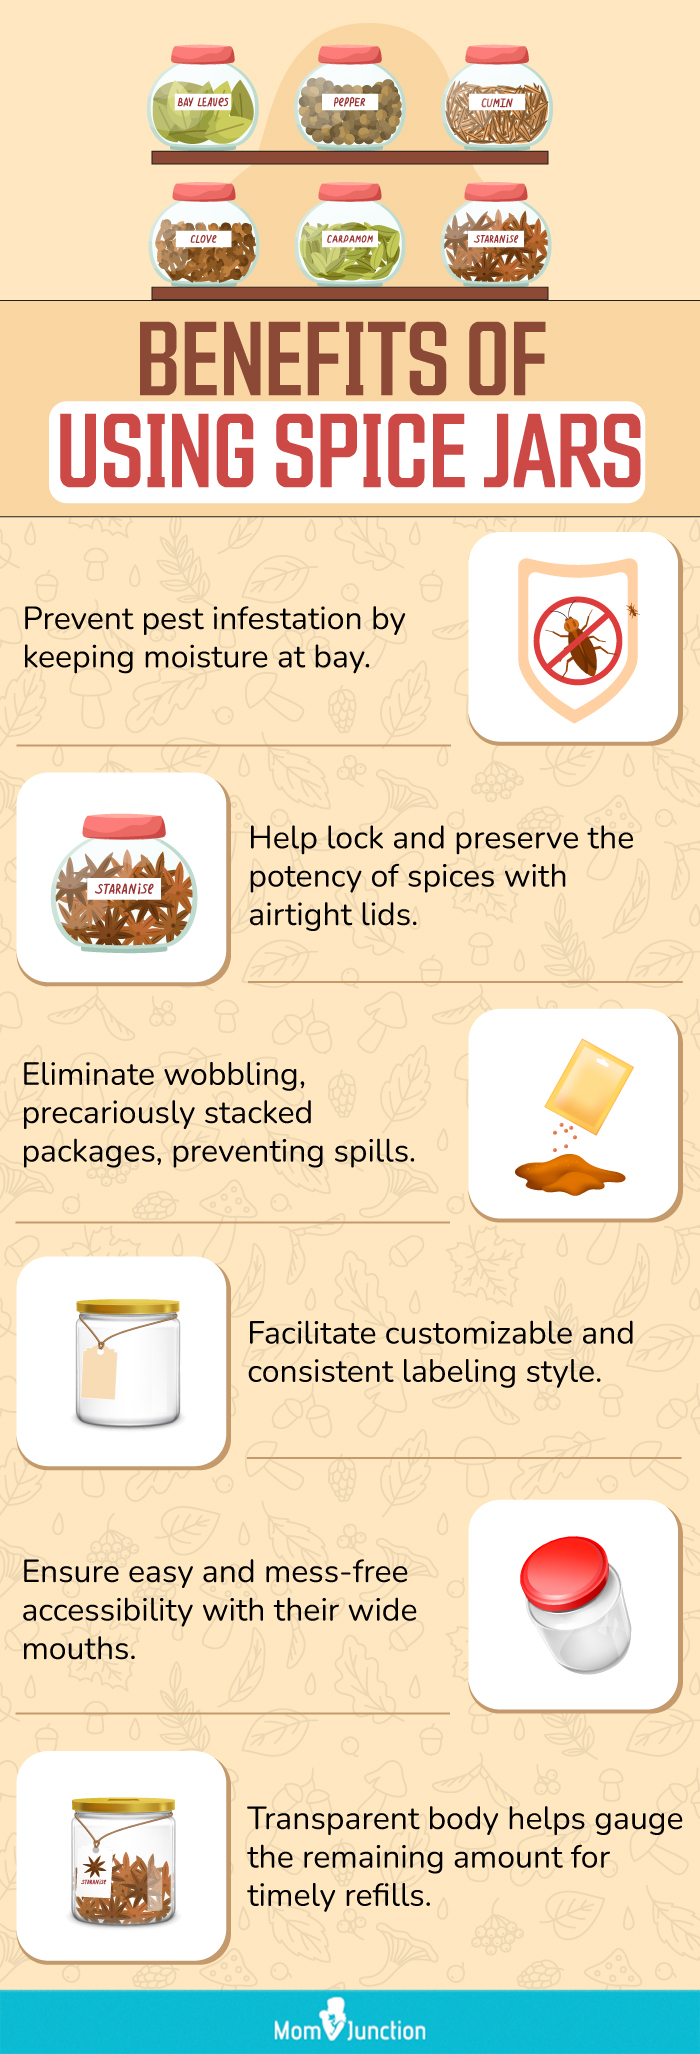 Benefits Of Using Spice Jars (infographic)